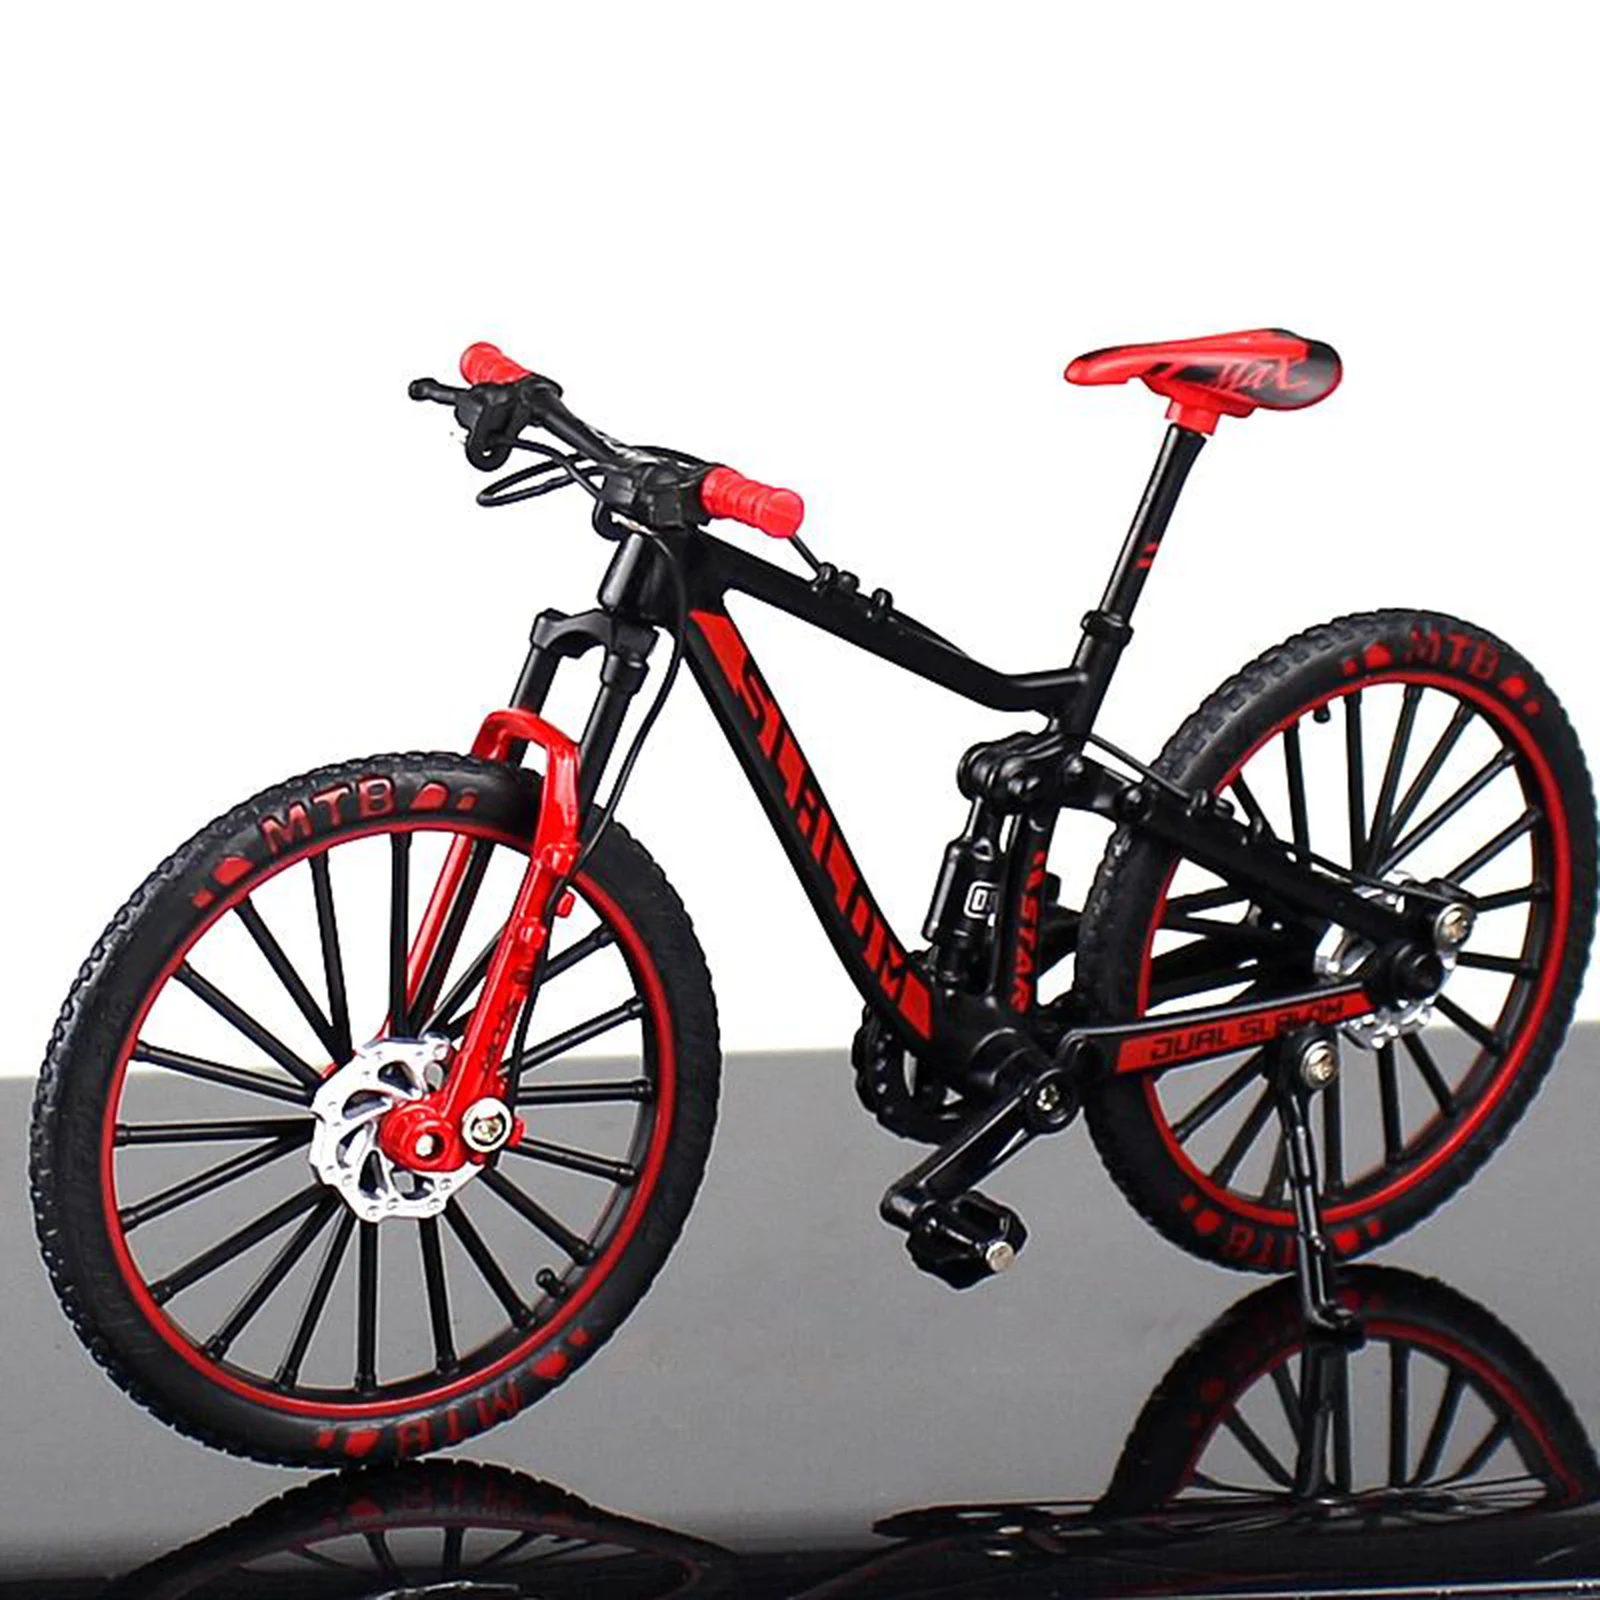 Mini Bicycle Model,1:10 Scale Die-Cast Bike Model Toy,Mountain Bicycle Desktop Decoration Ornaments Free Standing Miniature Finger Bikes Collection Toys Gift for Adult Kids Boys Girls Black, B 